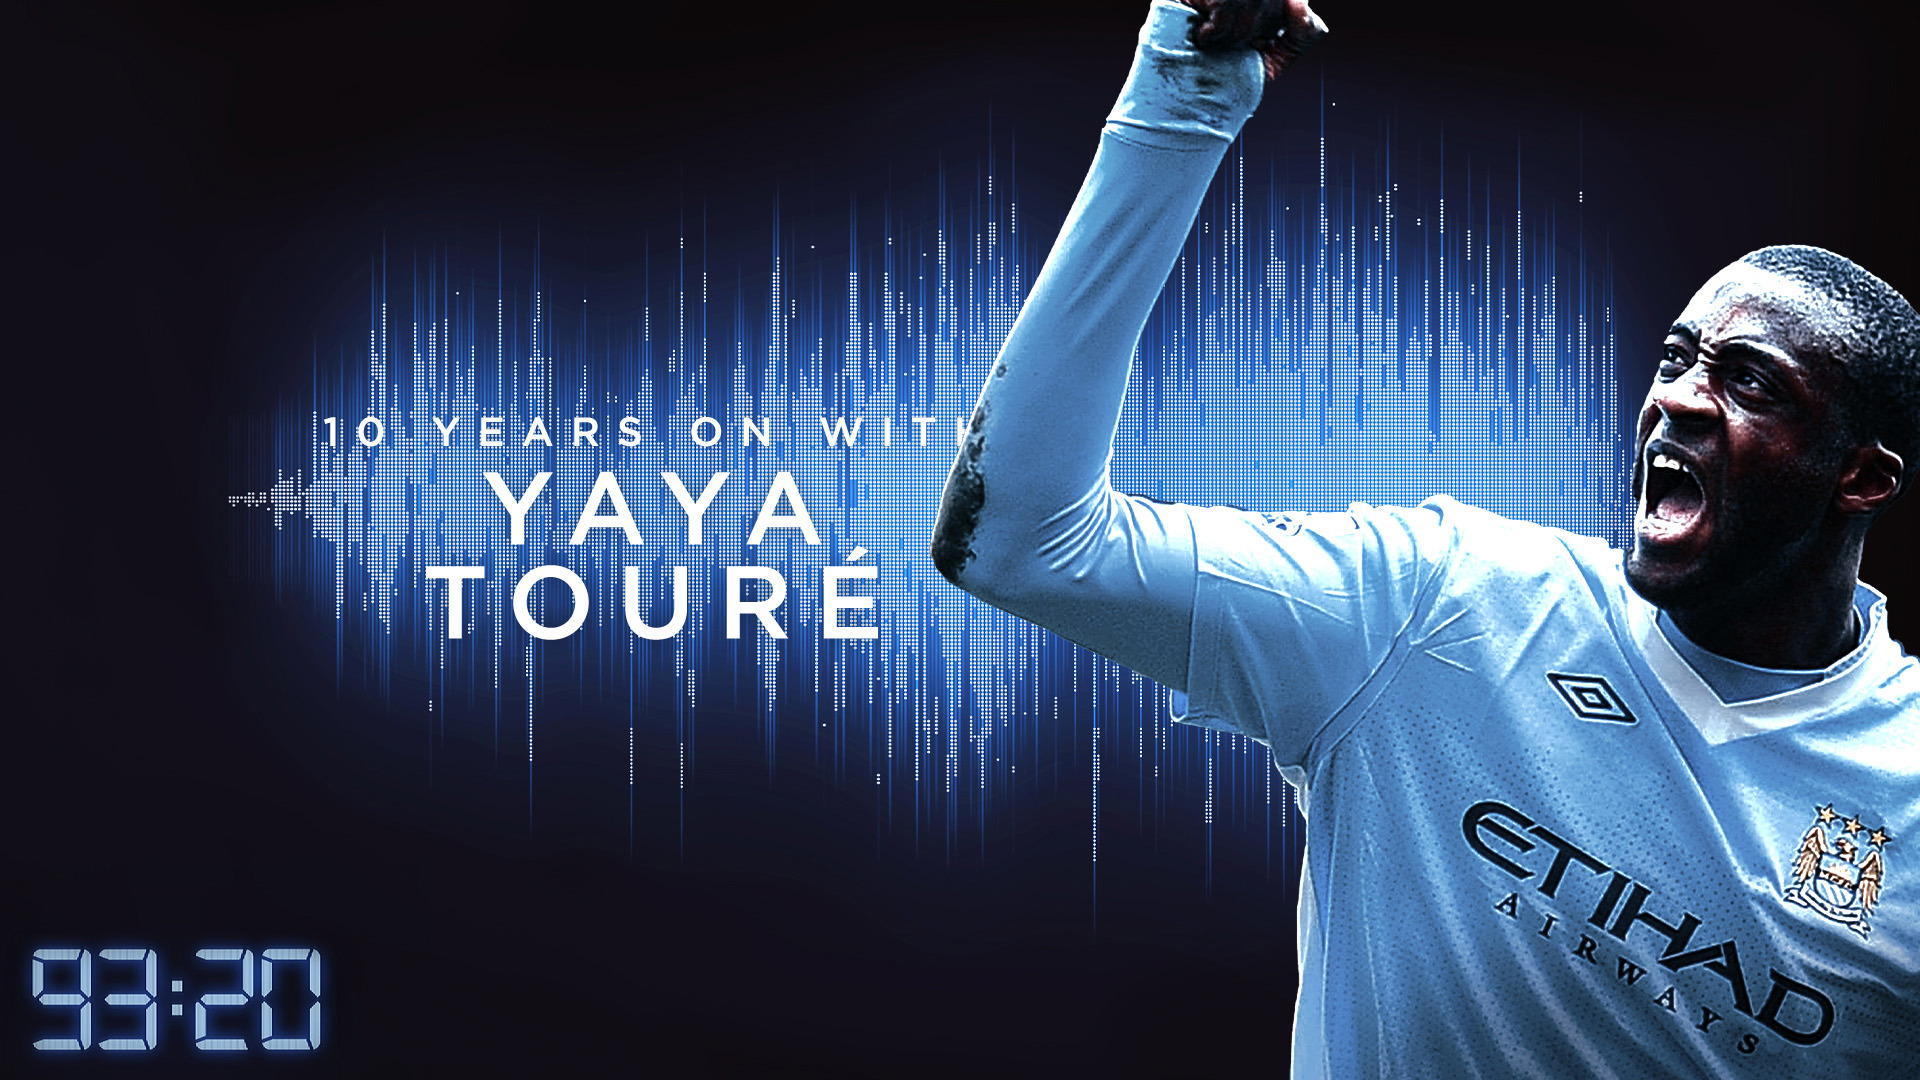 93:20 | Yaya Toure extended interview